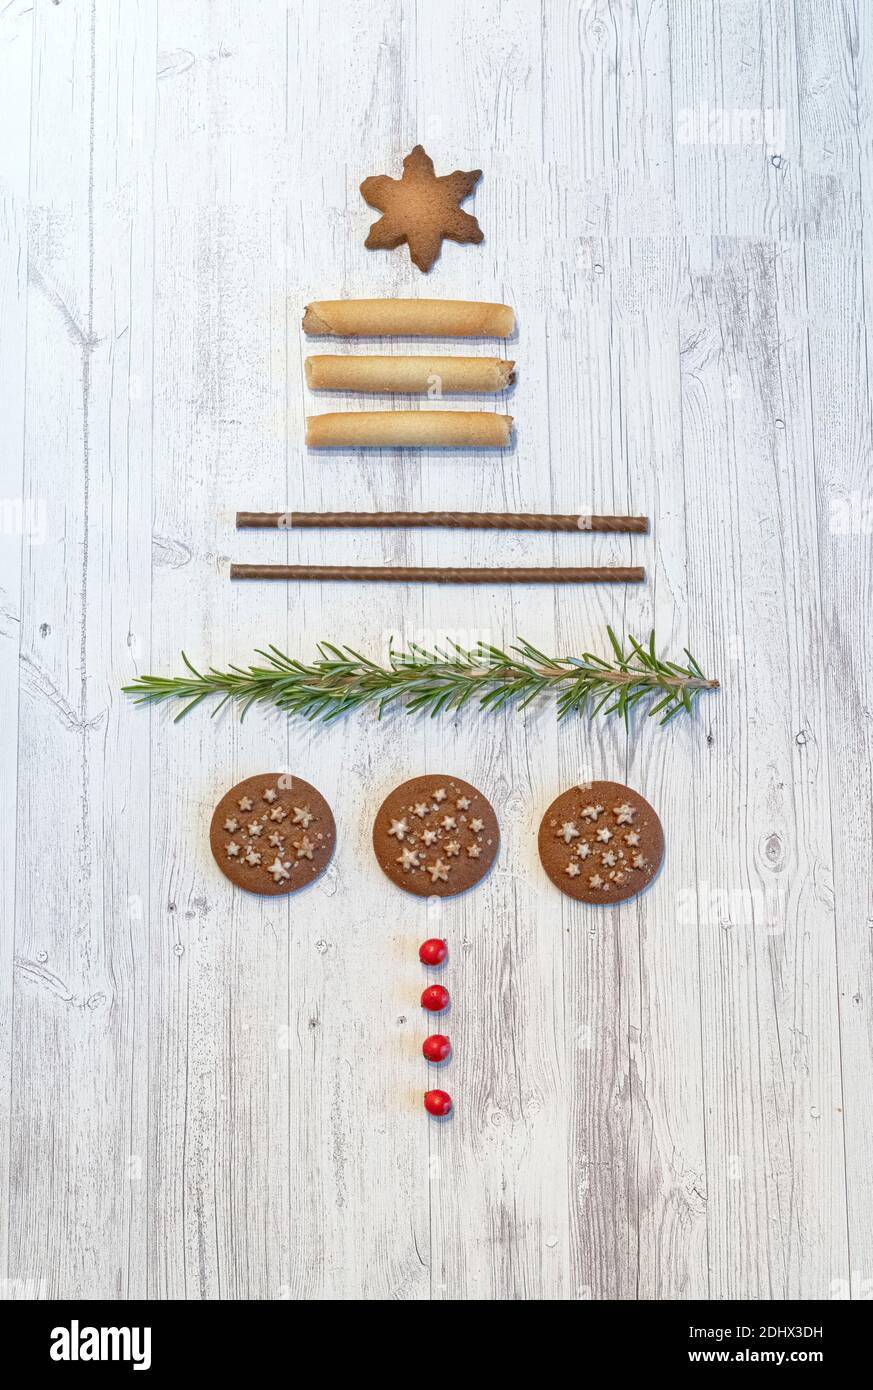 Conceptual Christmas tree made of cookies and fir tree needles on wood table background from above Stock Photo